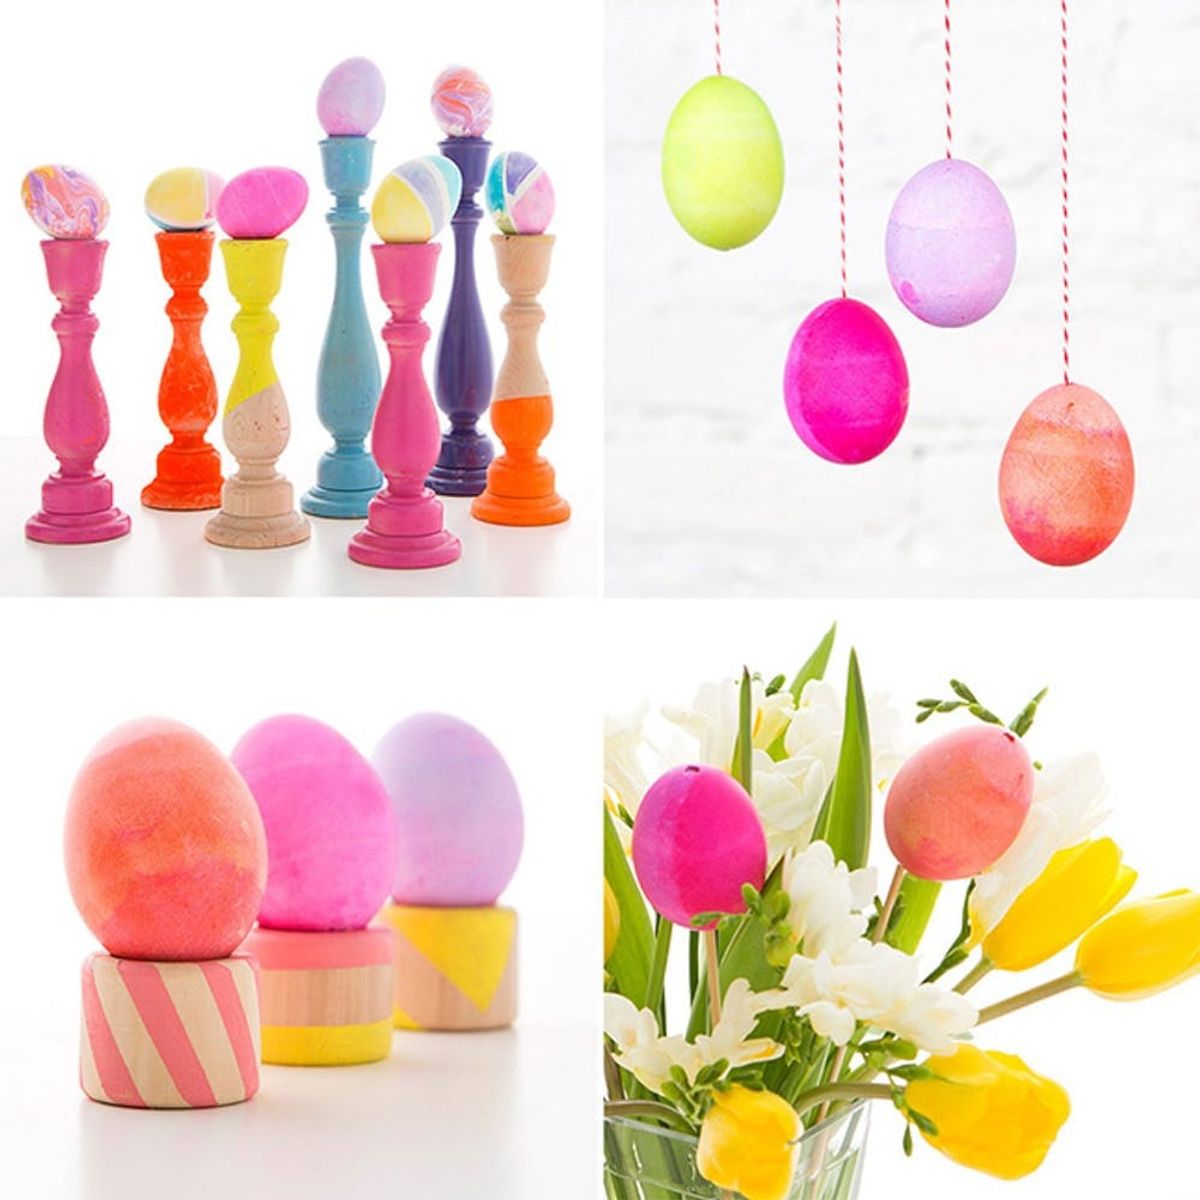 4 Easy Easter Egg Decorations You Can Make in 5 Minutes or Less